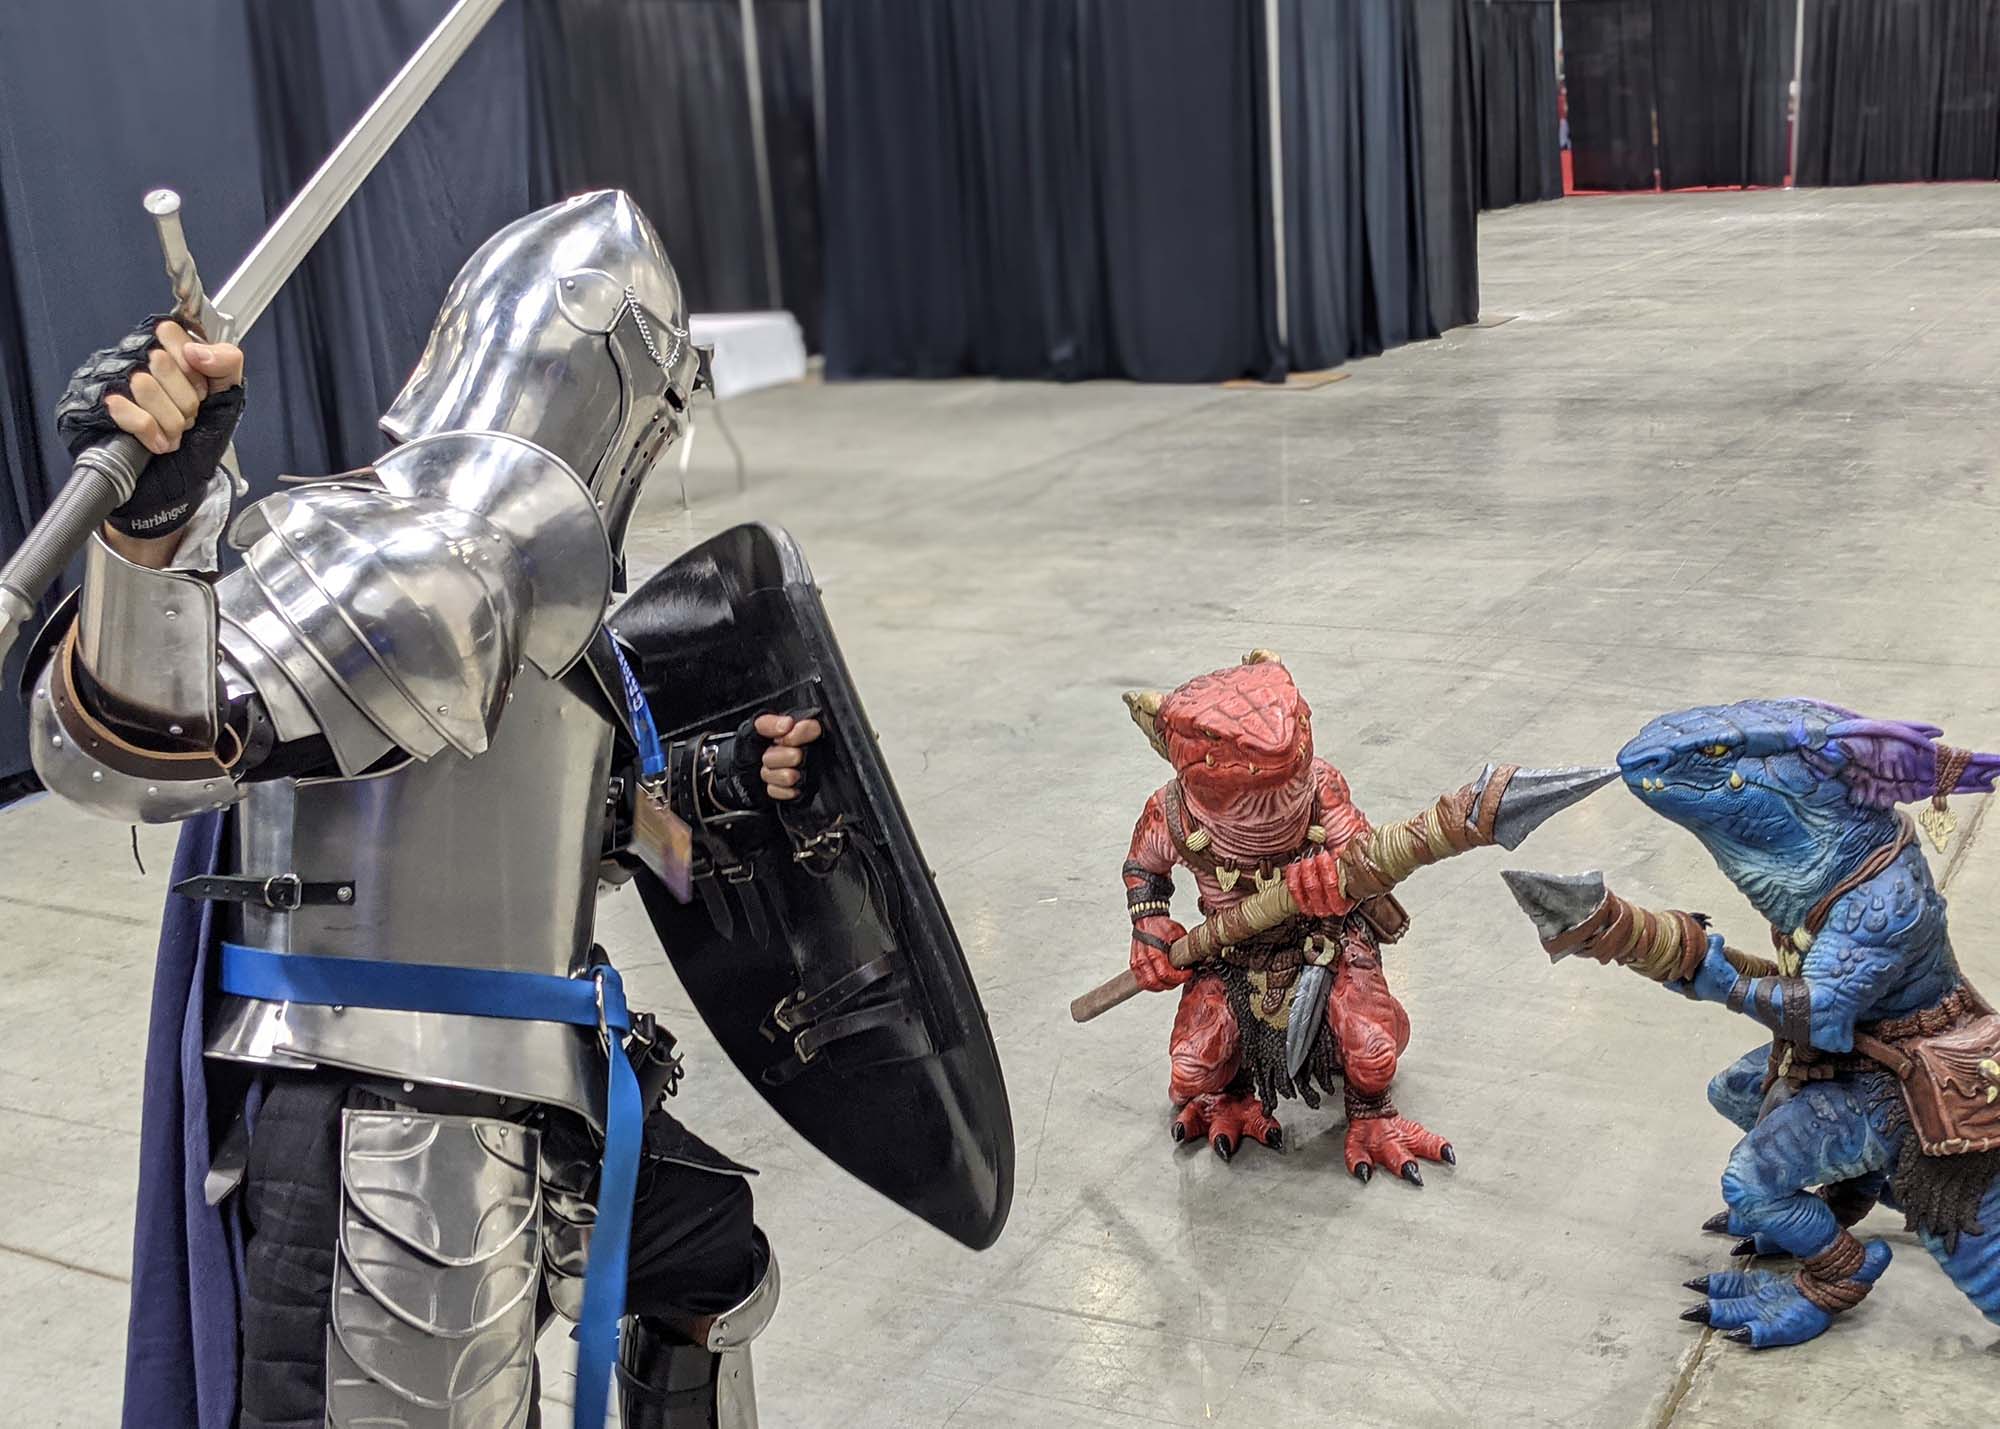 A person dressed in knight's armor facing off against two life sized foam kobolds